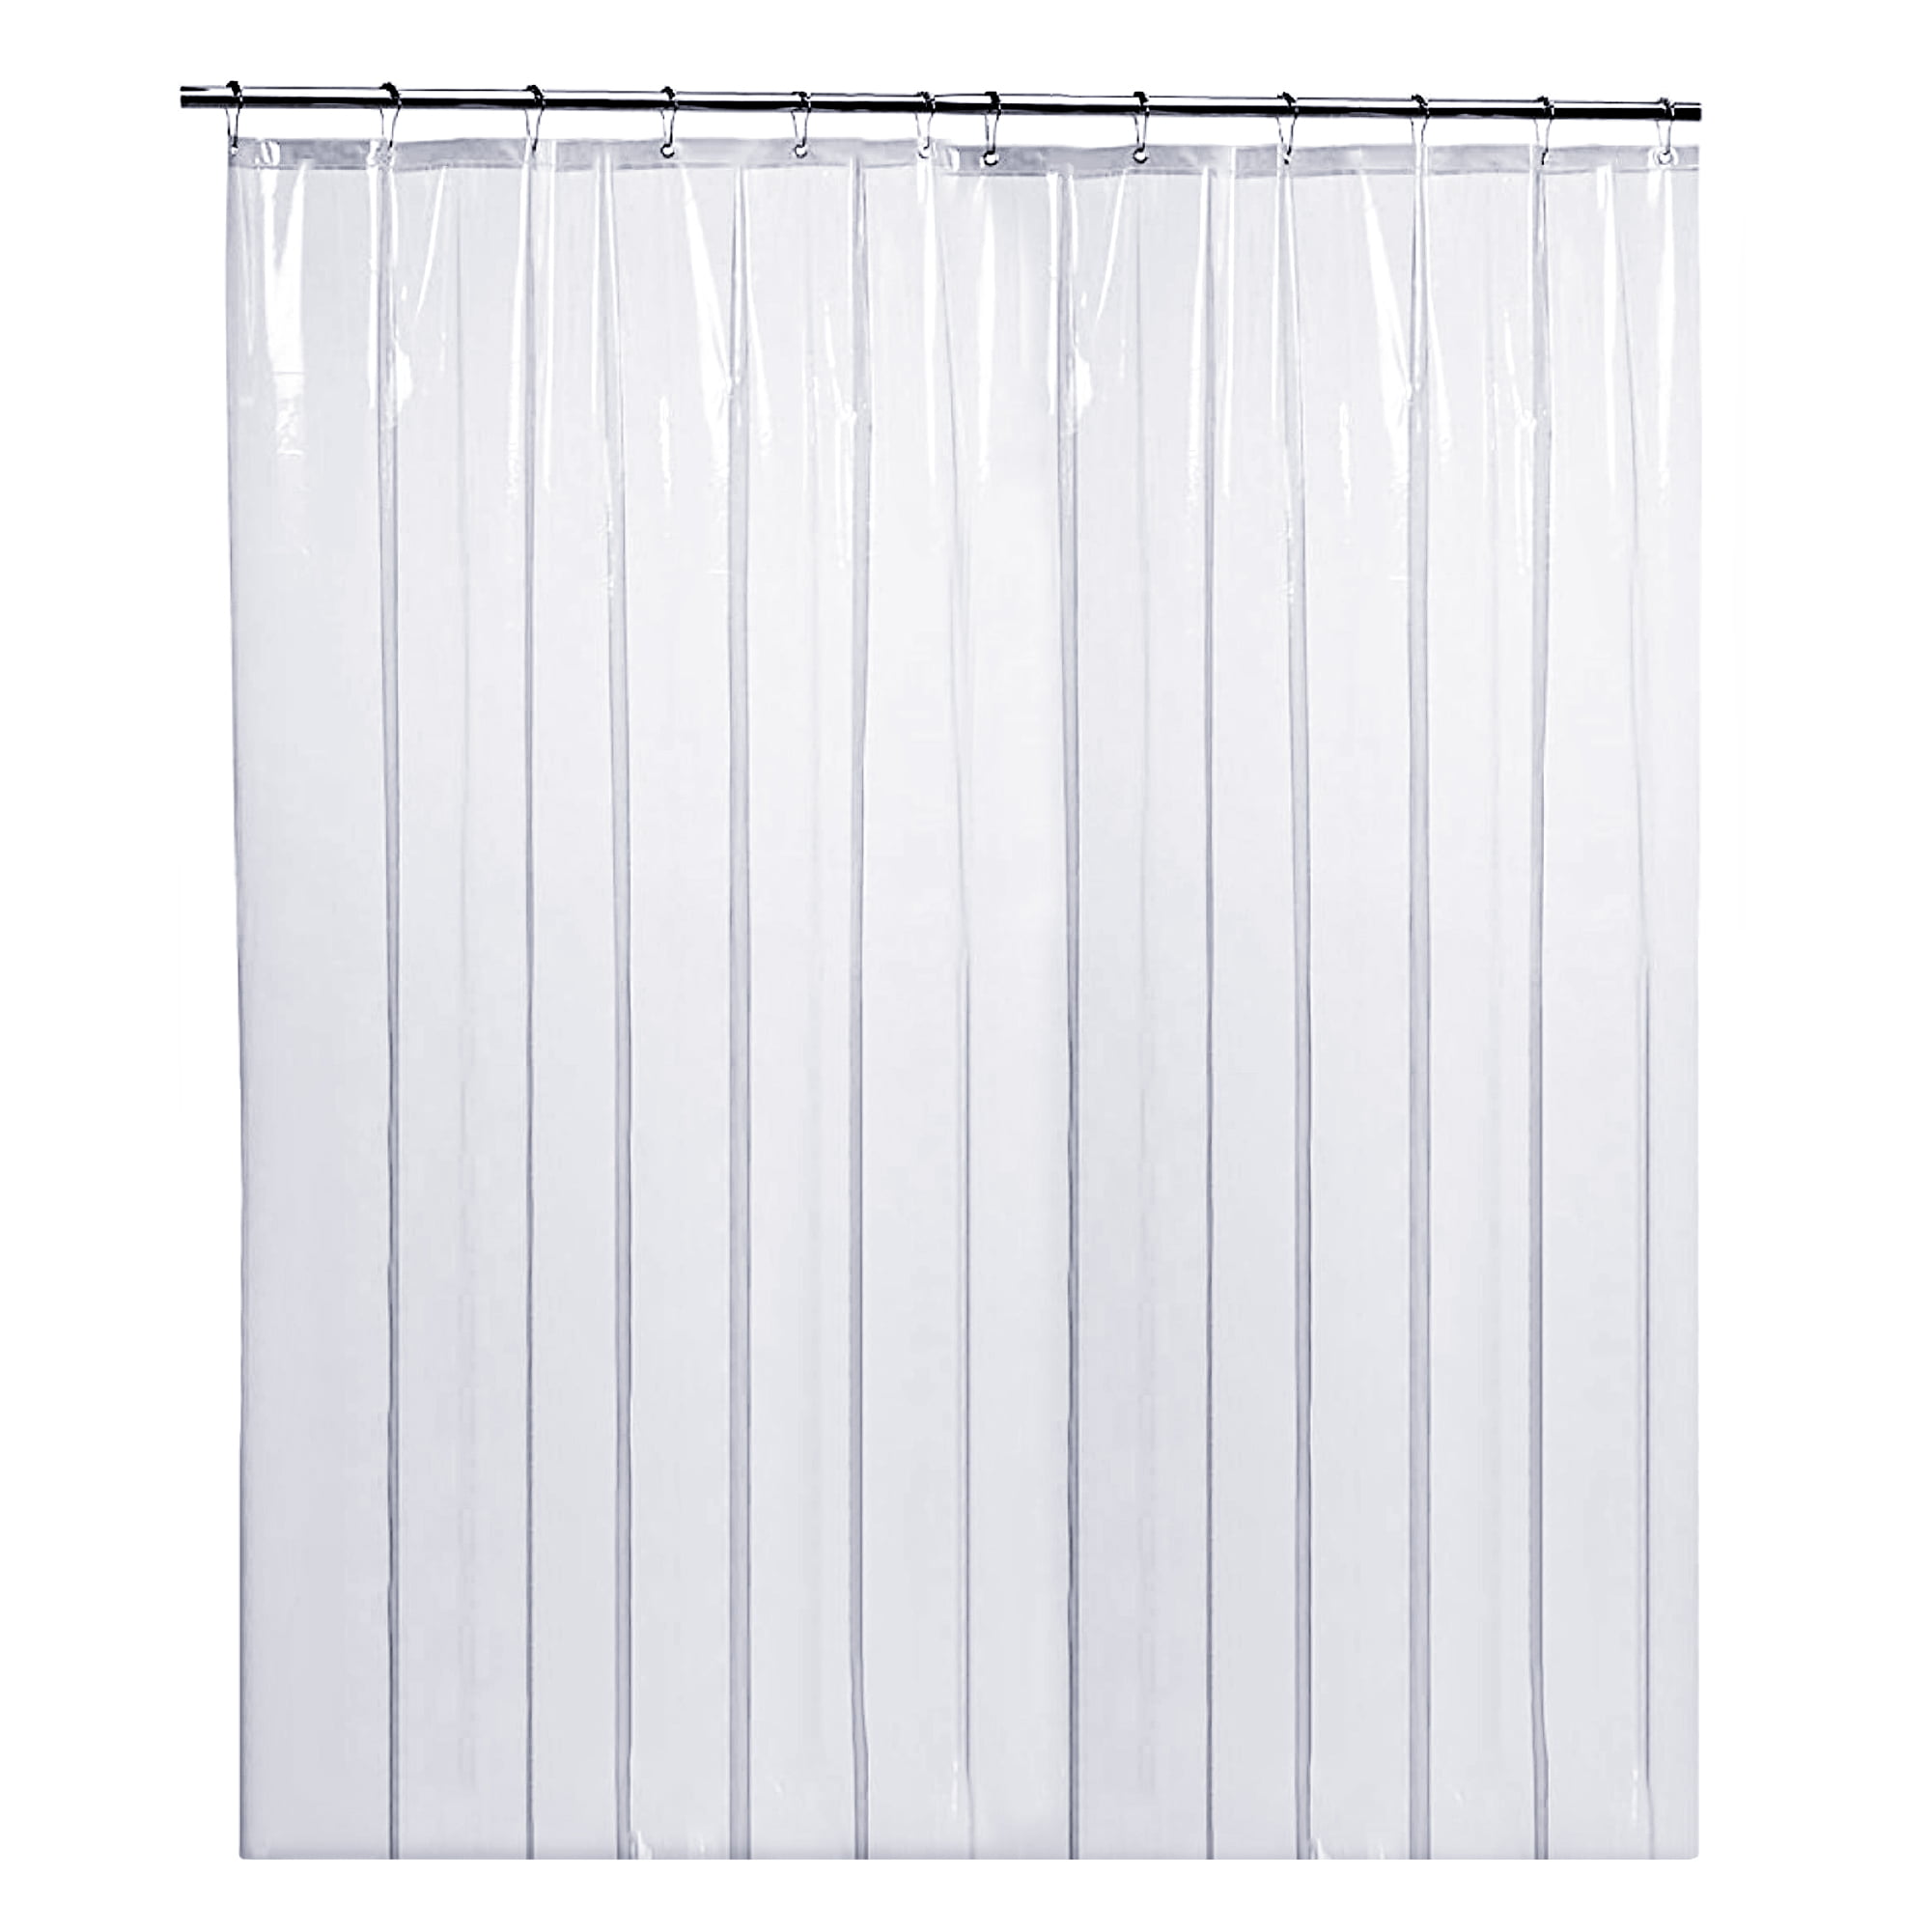 Clear Mildew Resistant Shower Curtain Liner Anti-Bacterial Heavy Duty 72 x 84 